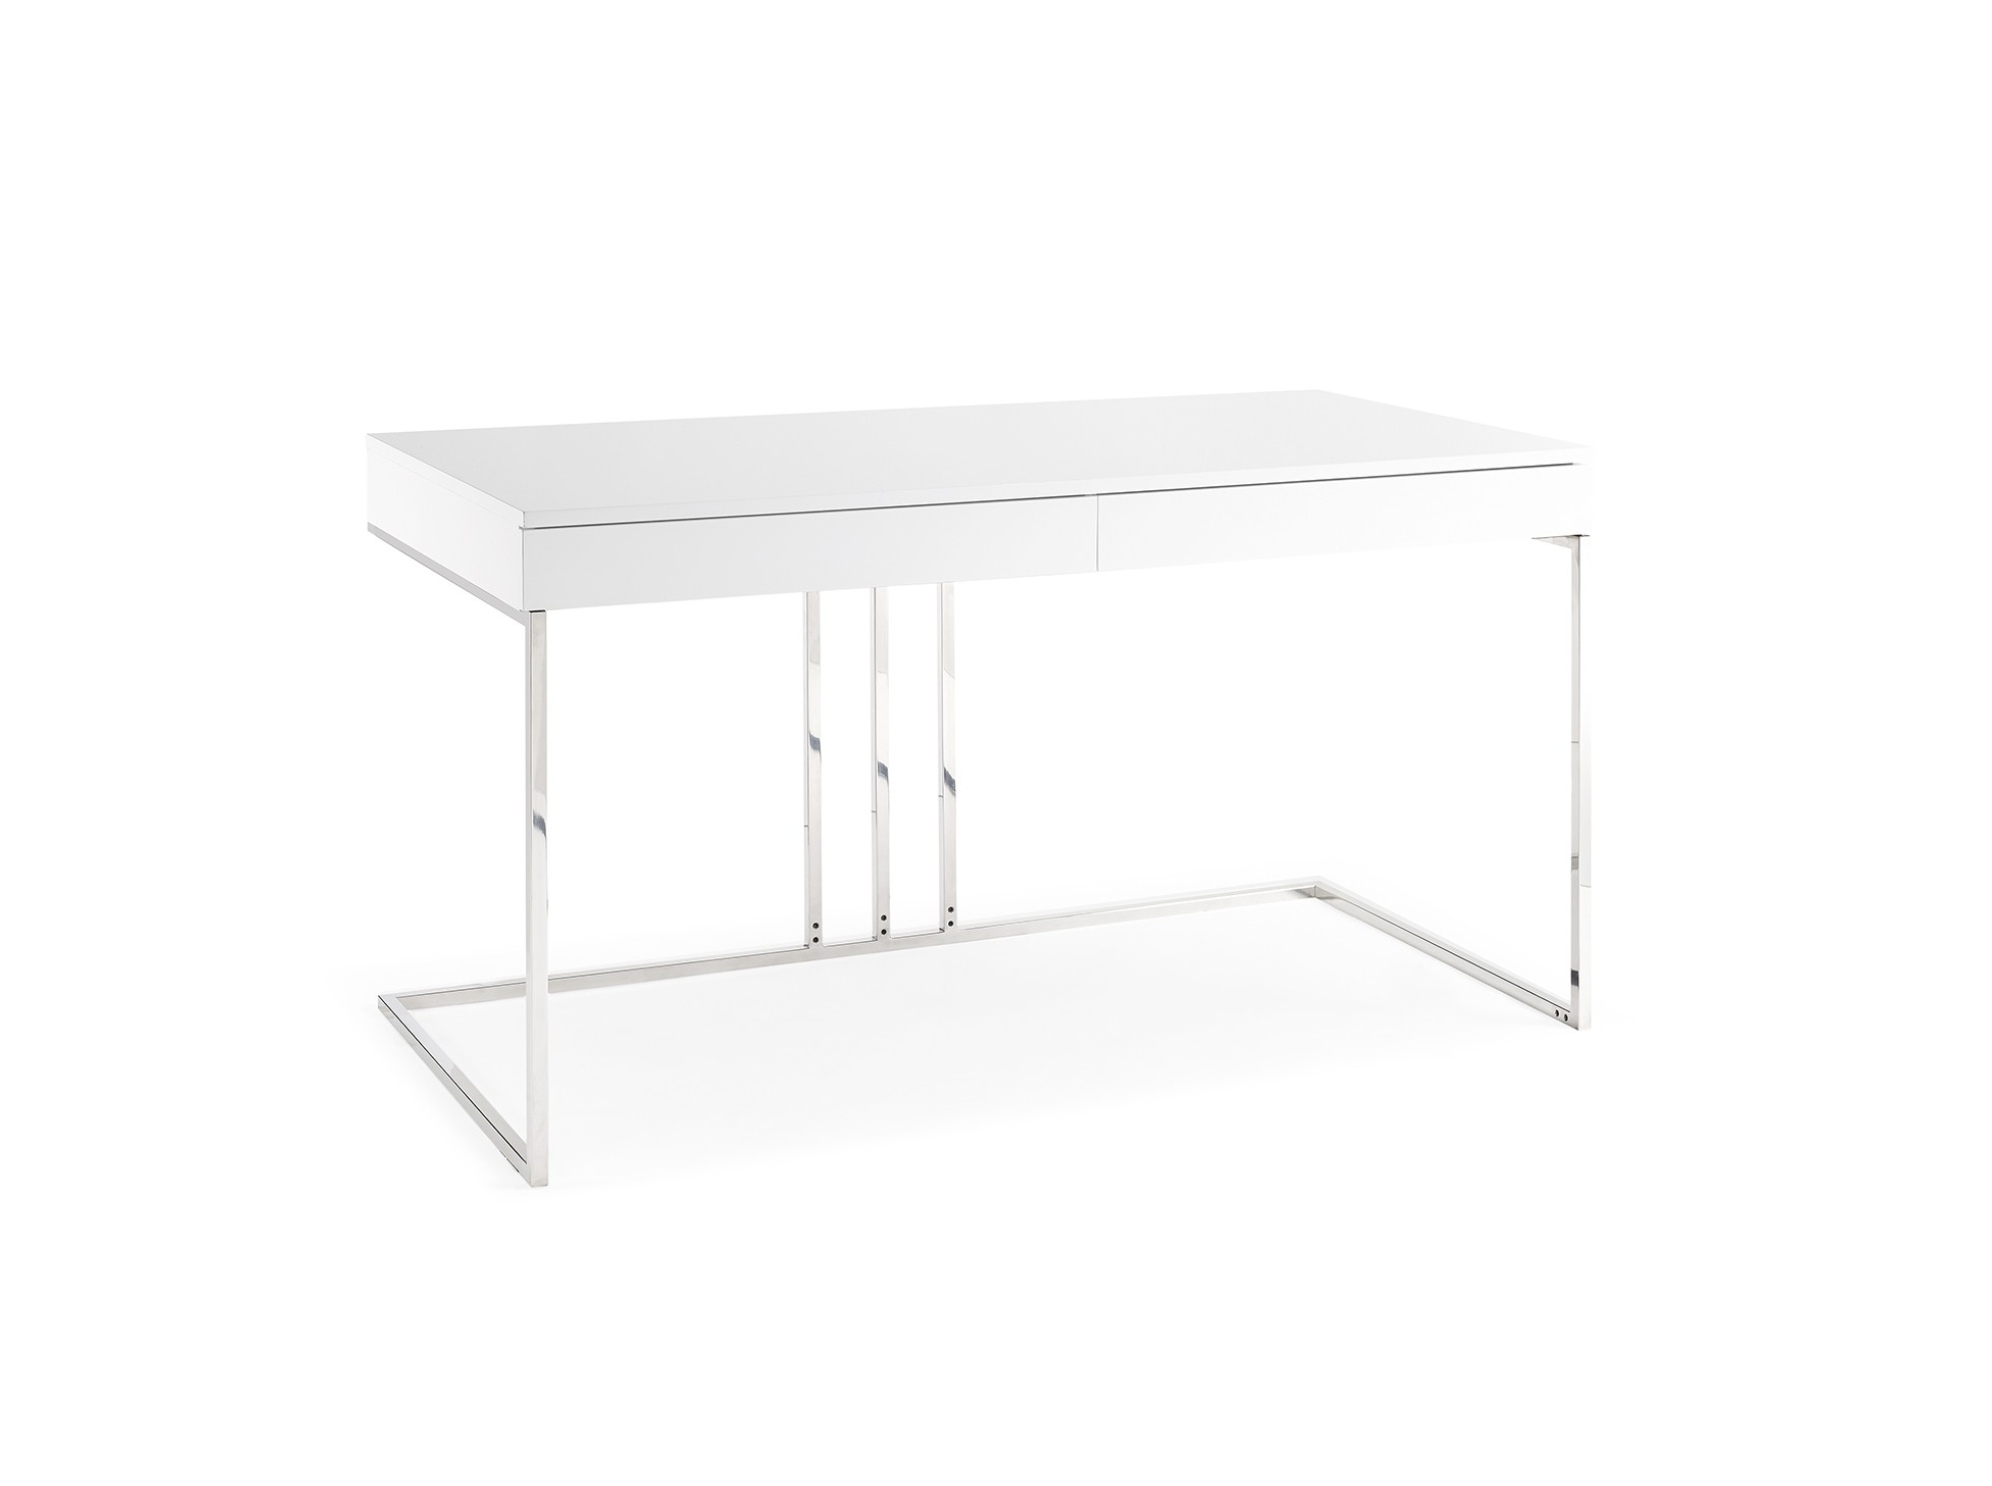 Elite High Gloss White Lacquer Desk with Stainless Steel Base